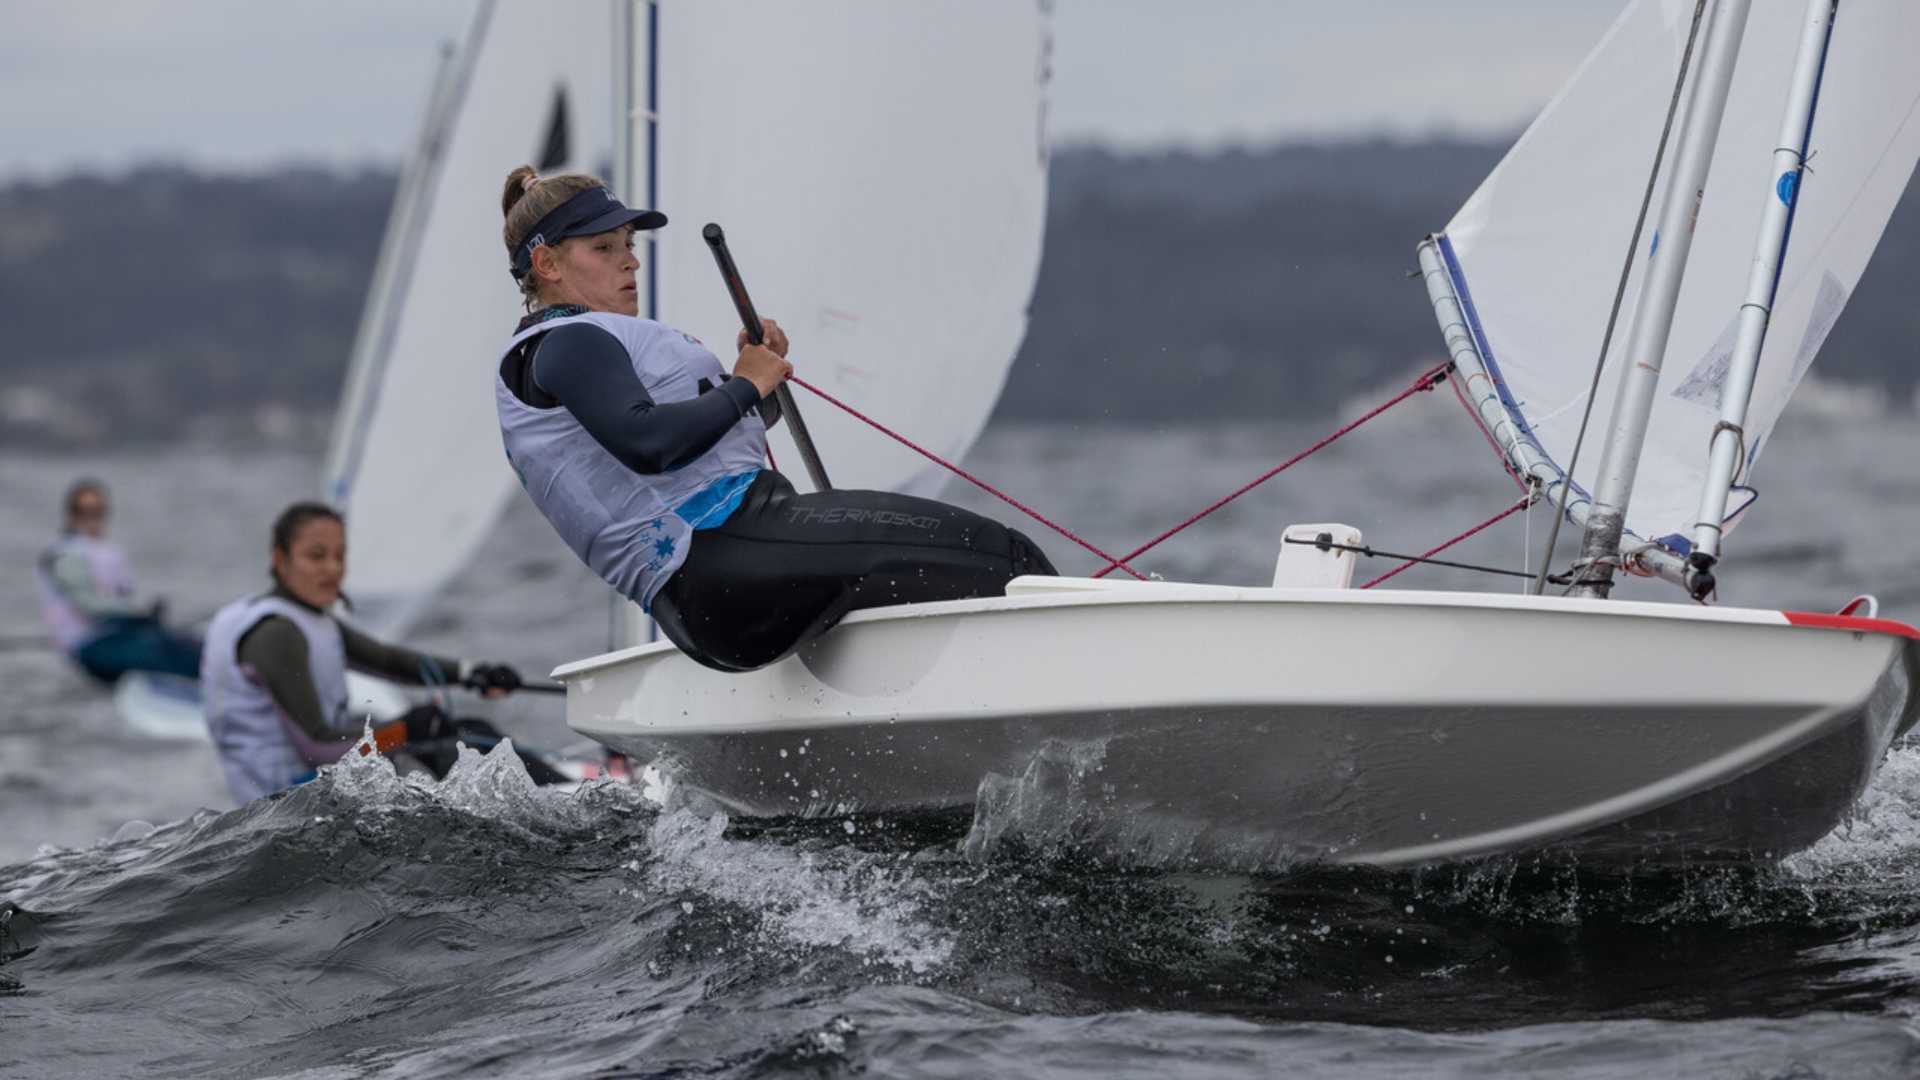 The United States and Peru were protagonists in the third day of sailing